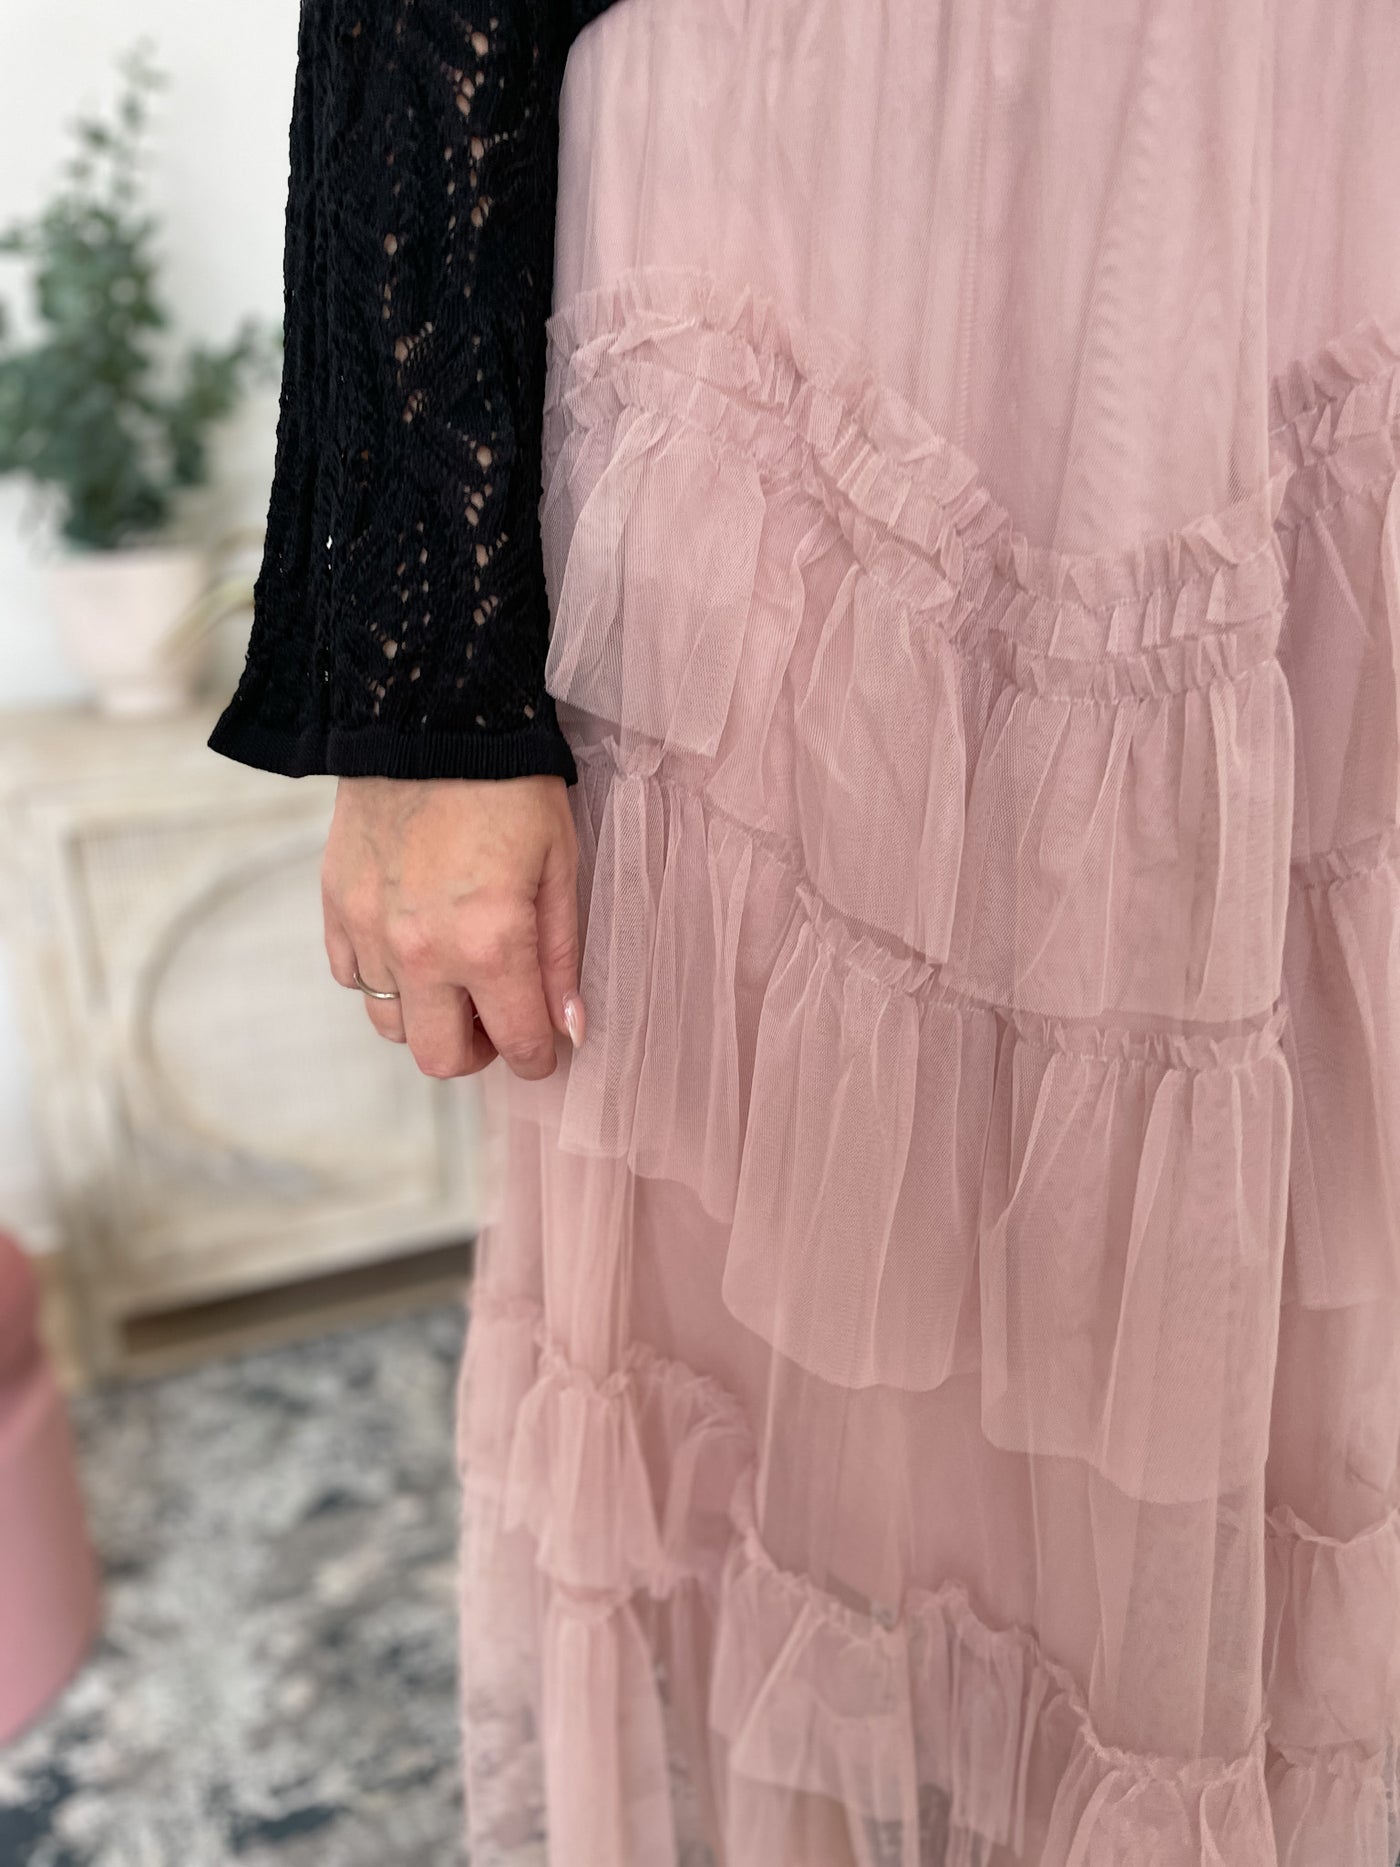 The Tiered Ruffled Tulle Midi Skirt in Nude Pink